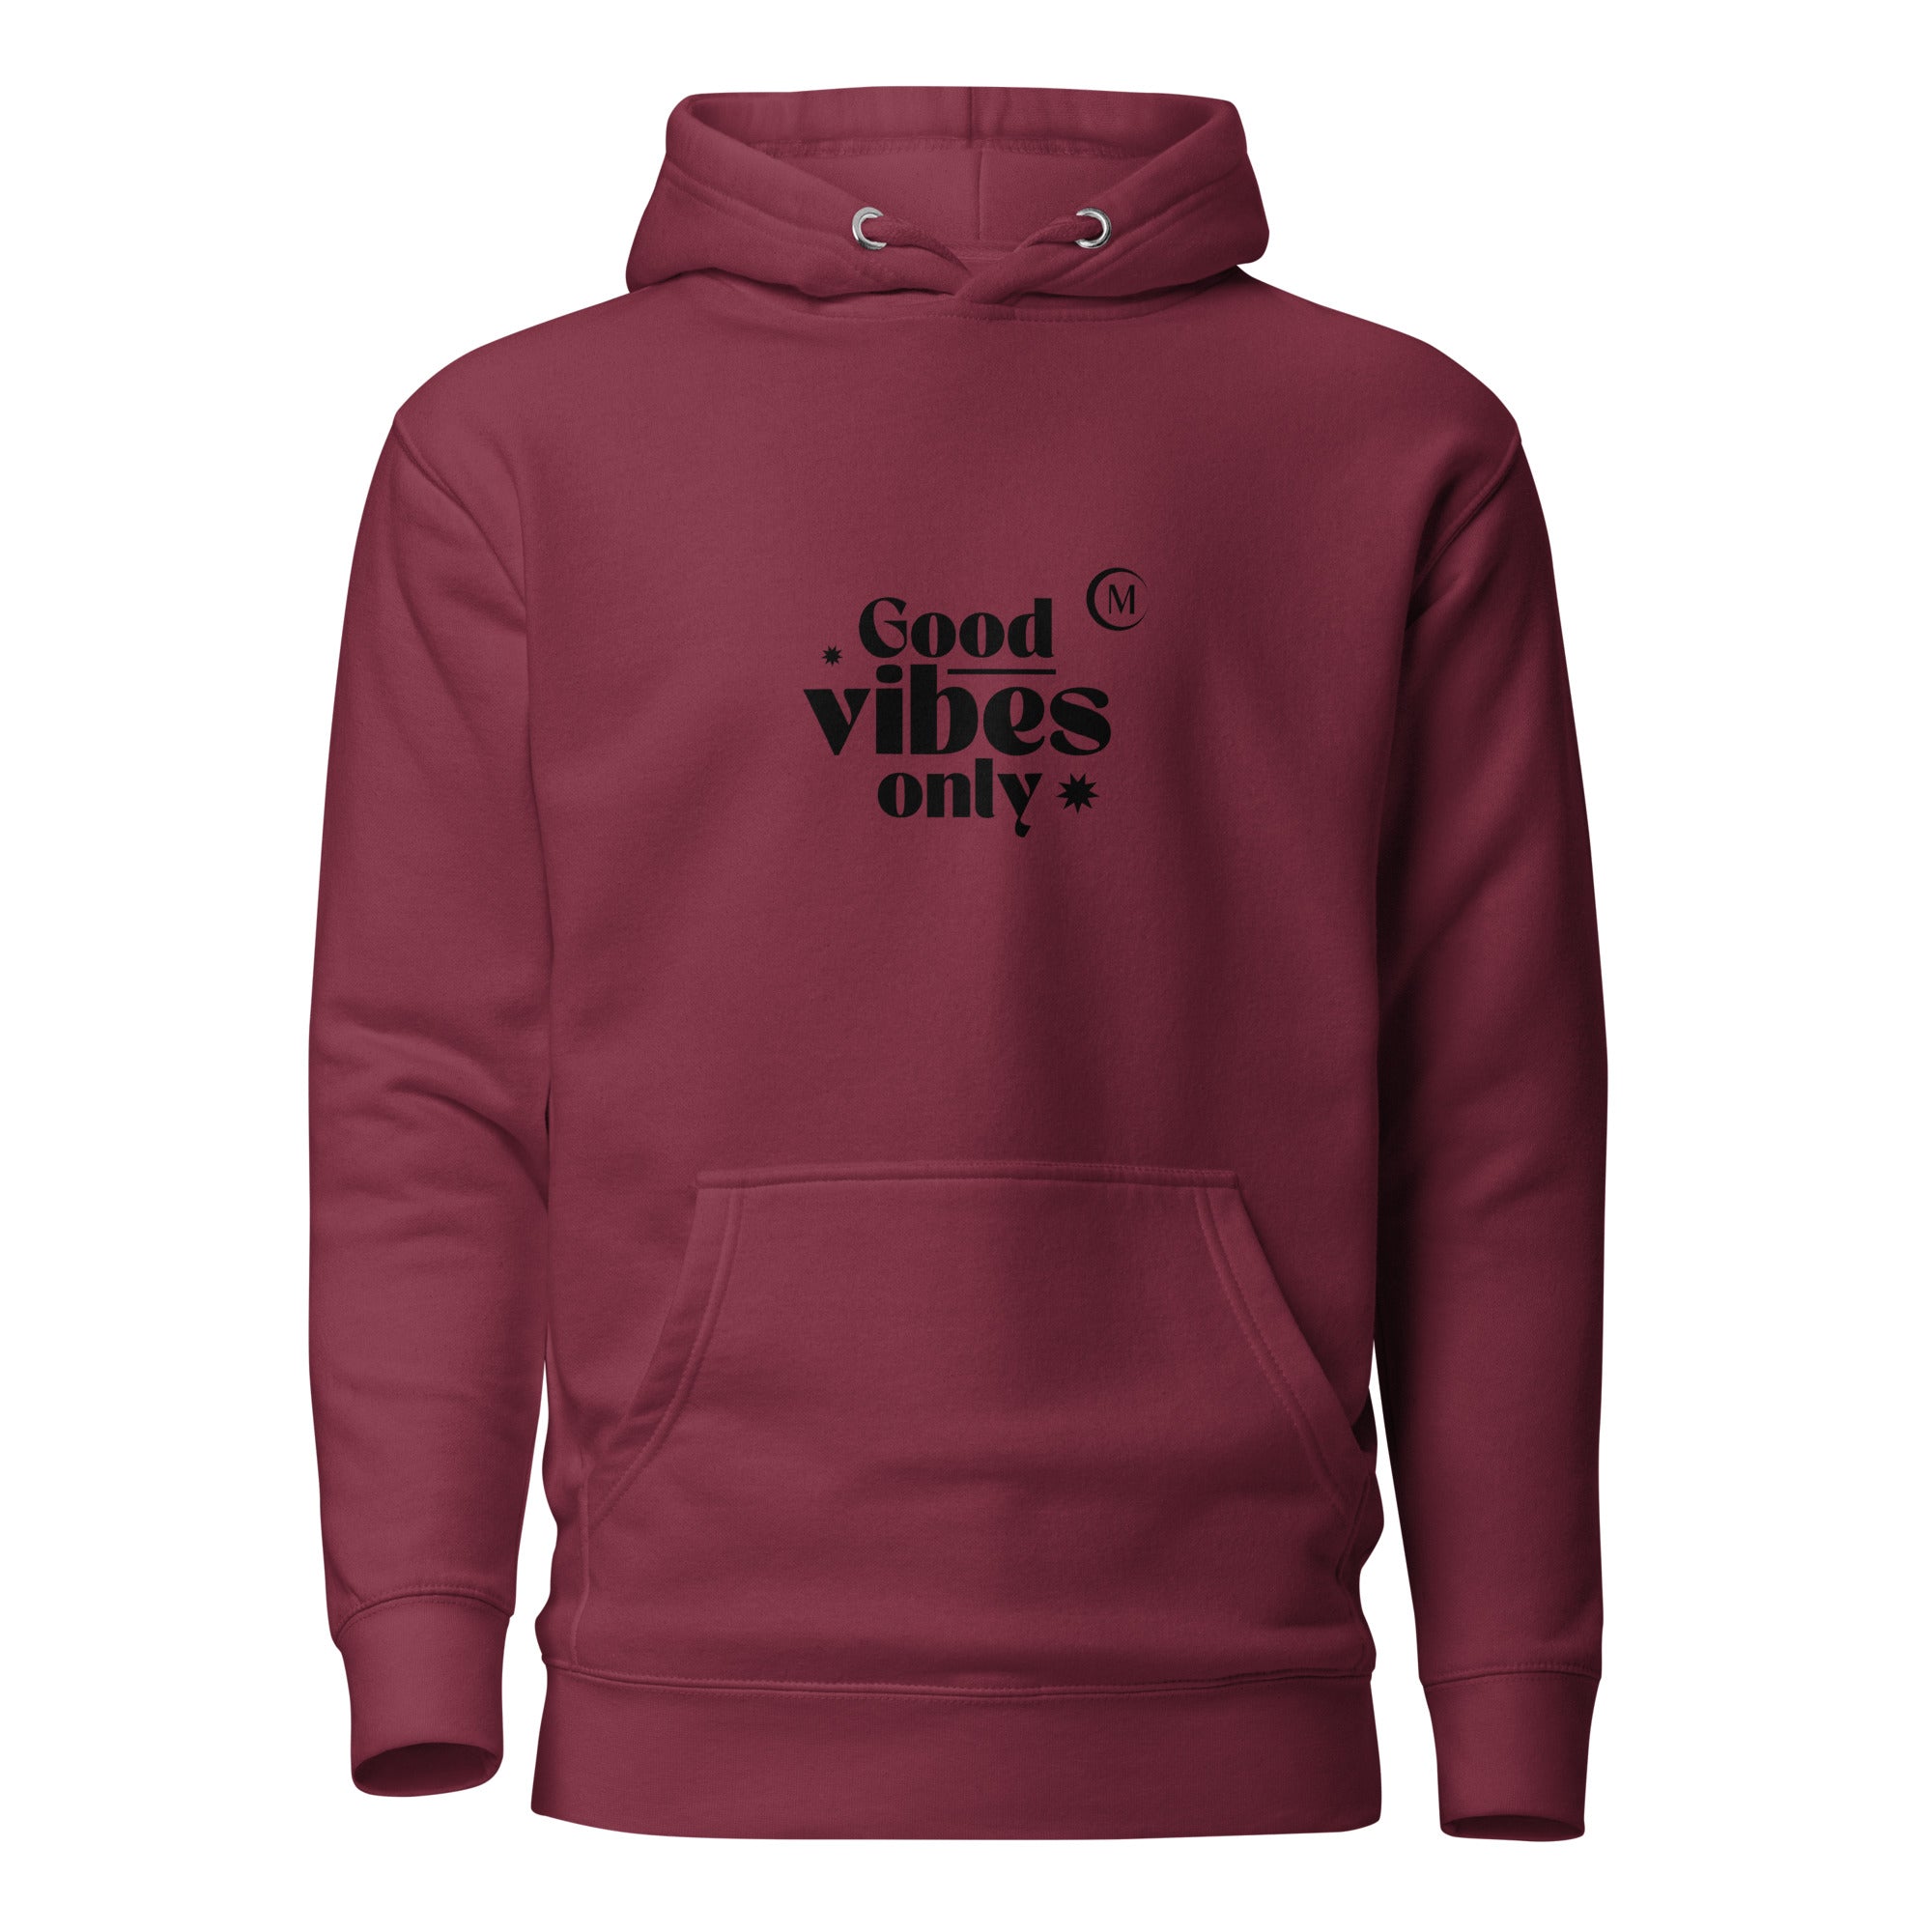 Clarissa Molina - Hoodie Good Vibes Only